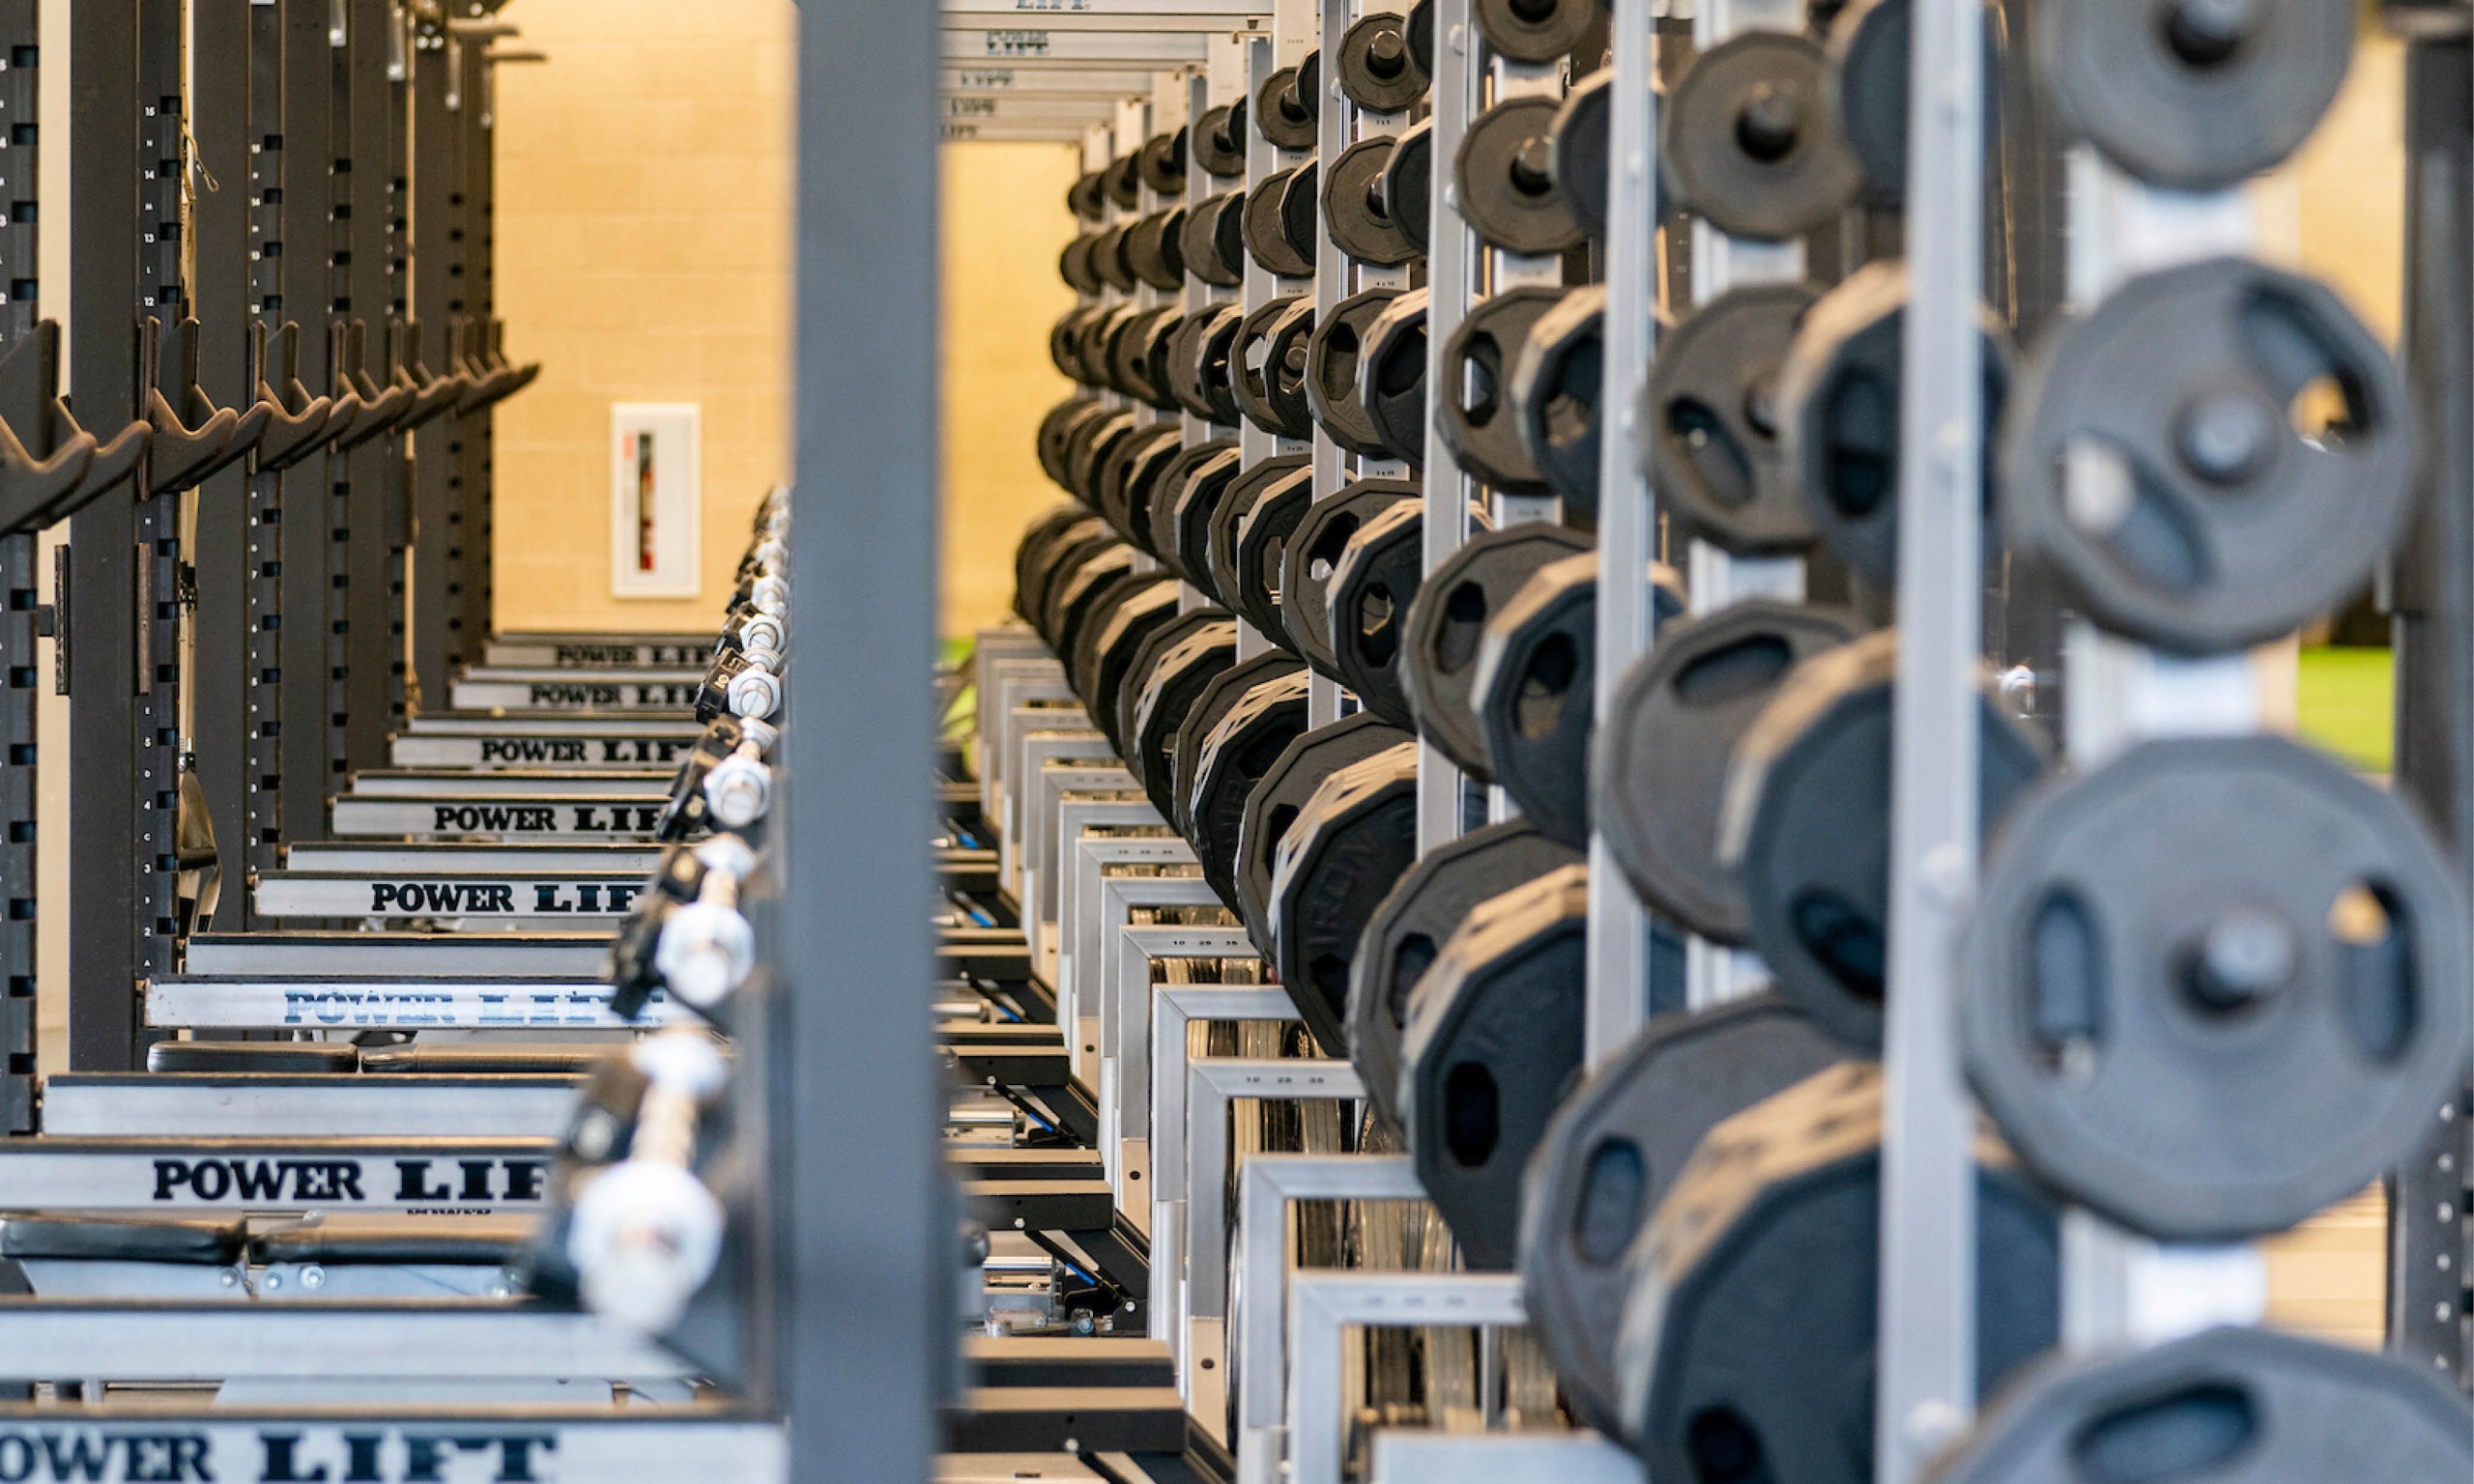 inside the strength & conditioning room of the weights